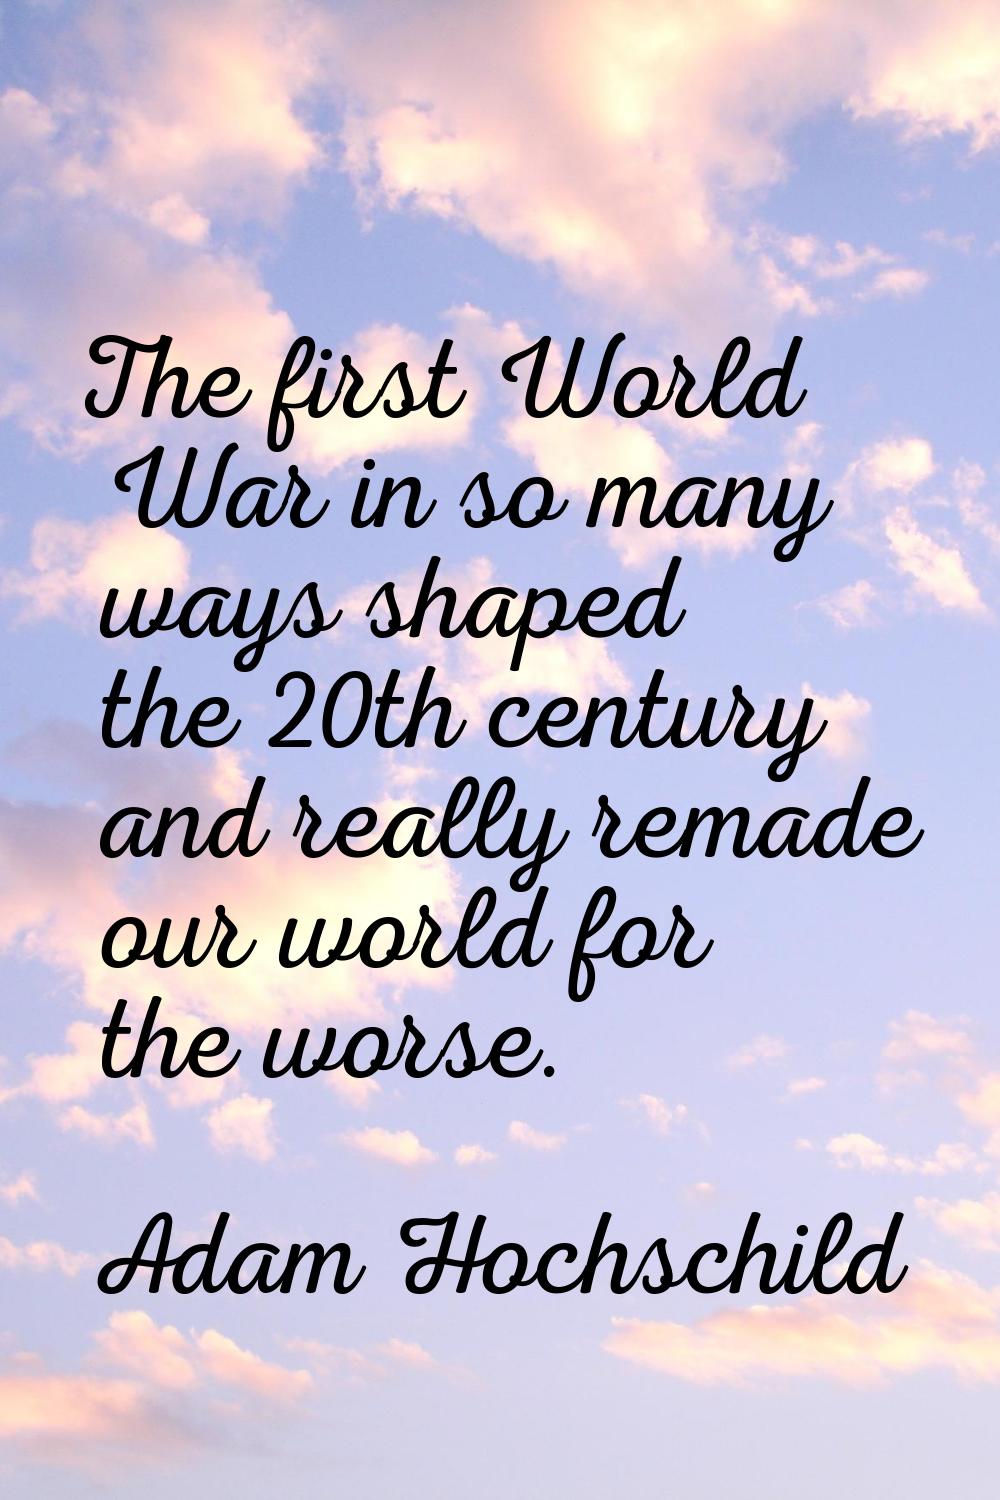 The first World War in so many ways shaped the 20th century and really remade our world for the wor